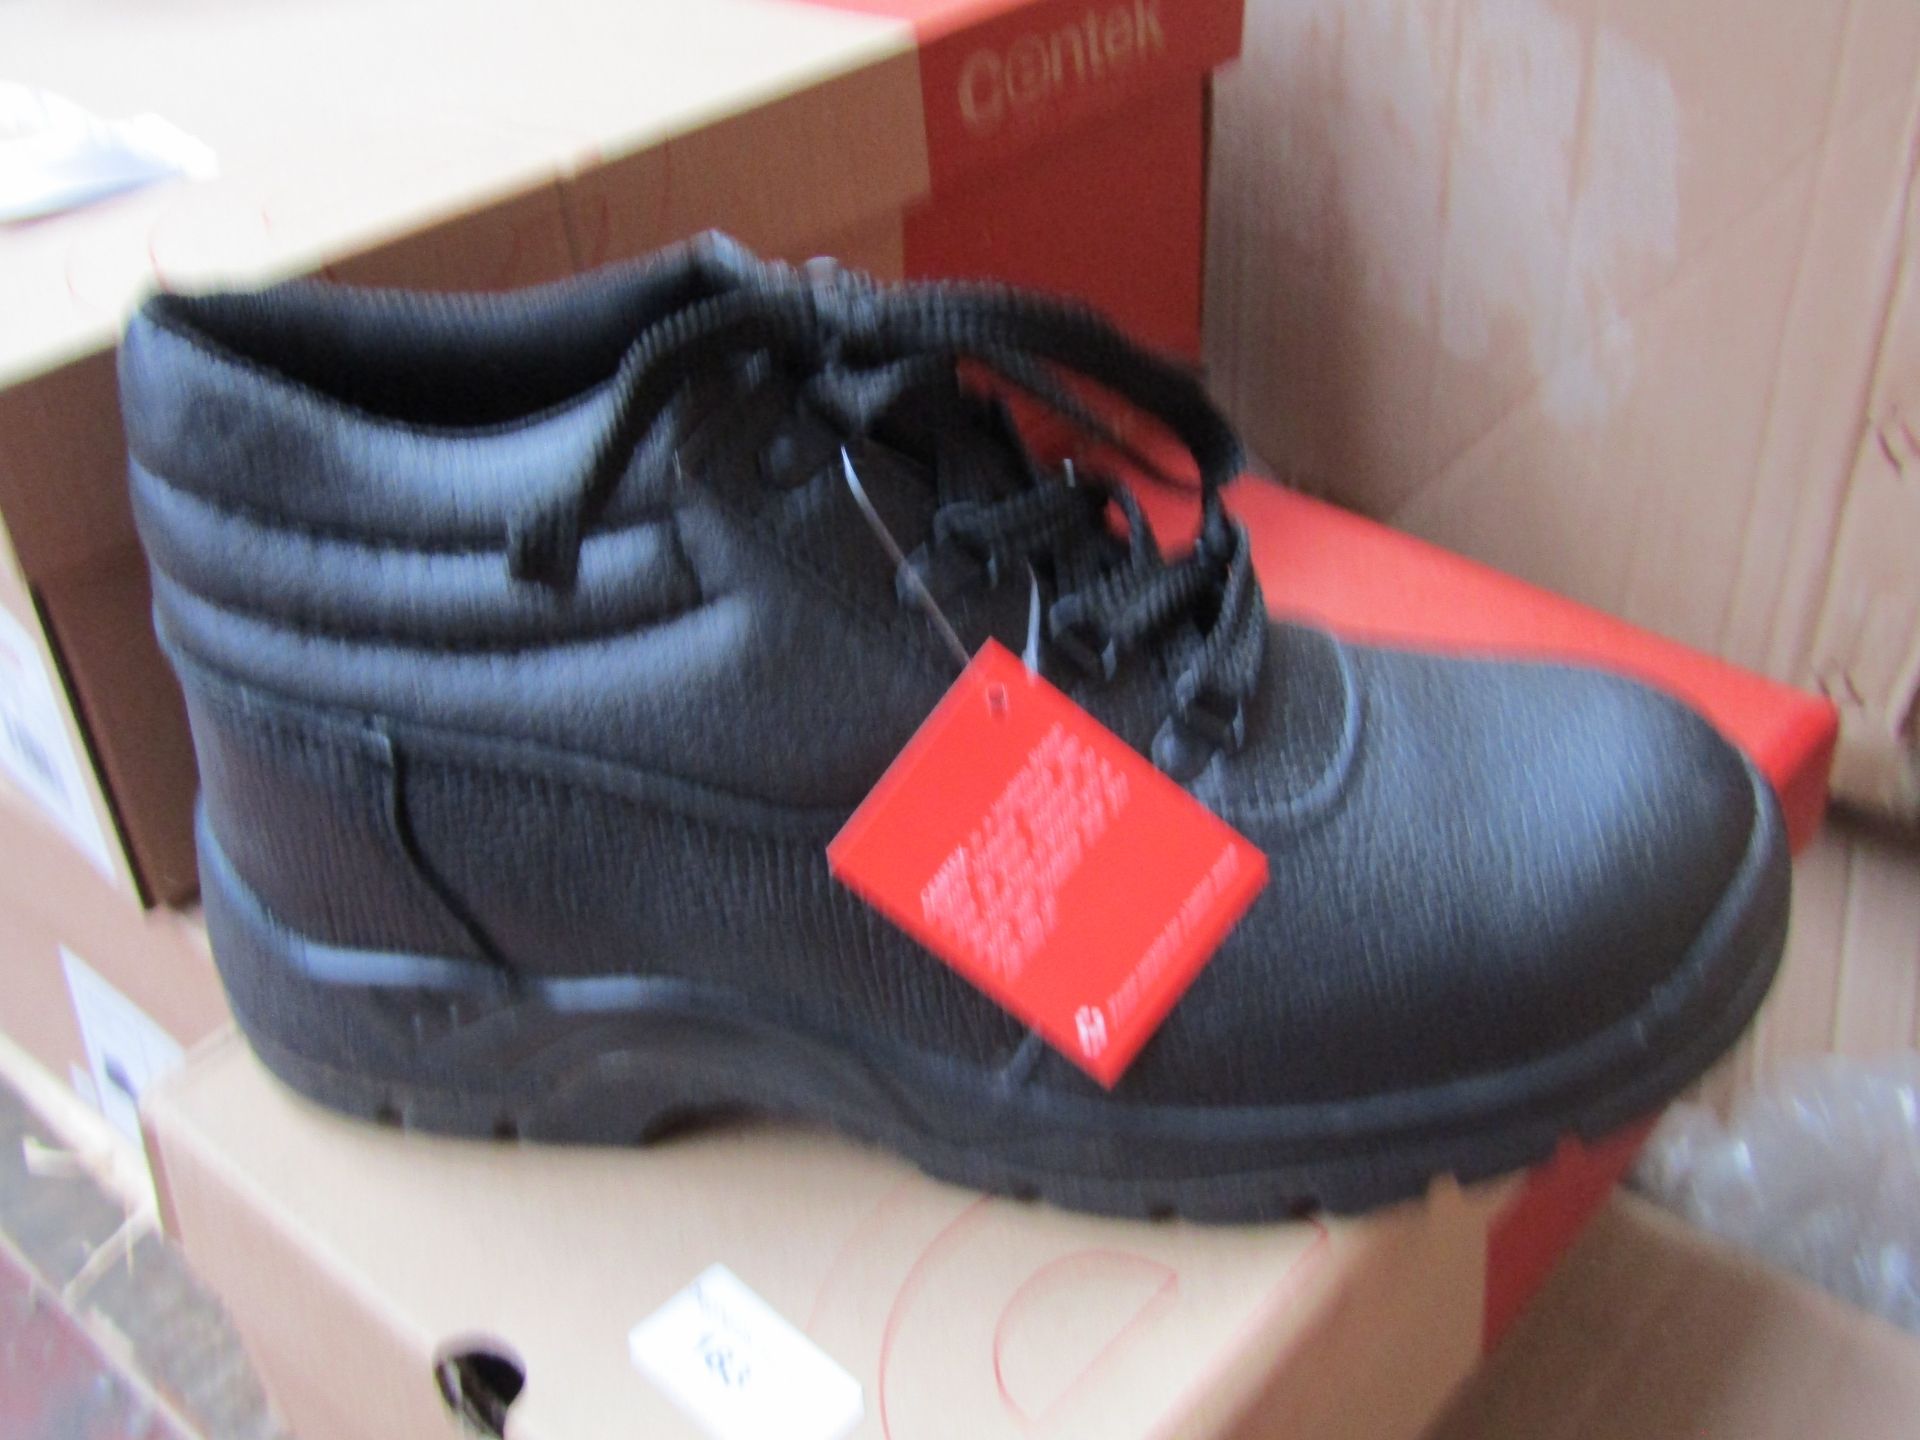 centek steel toe cap shoe size 9, new and boxed